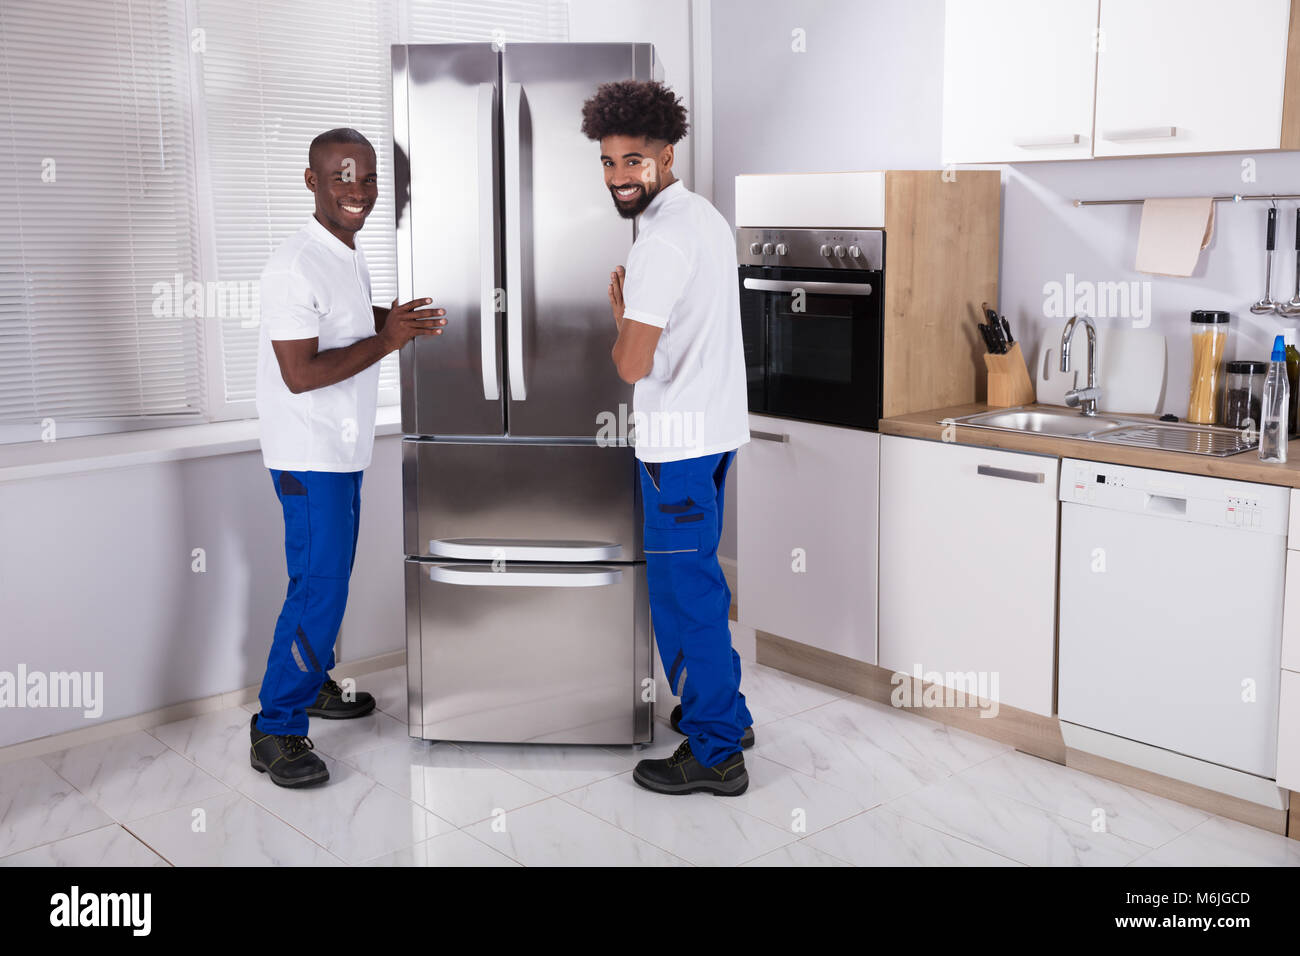 Two Male Movers In Uniform Fixing The Freezer In The Kitchen At Home Stock Photo